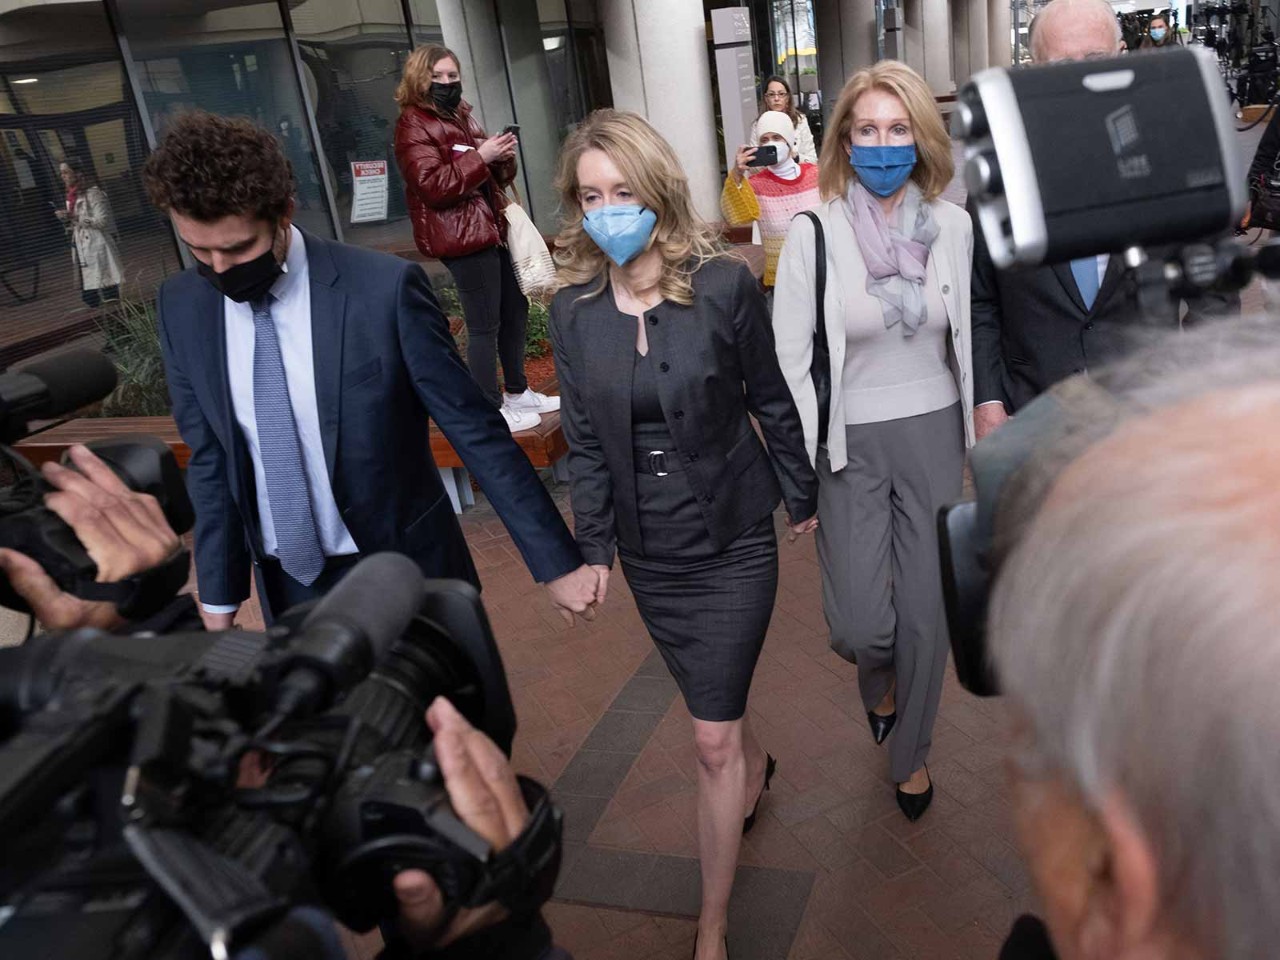 Elizabeth Holmes (centre), founder and former CEO of life sciences company Theranos, leaves court in January